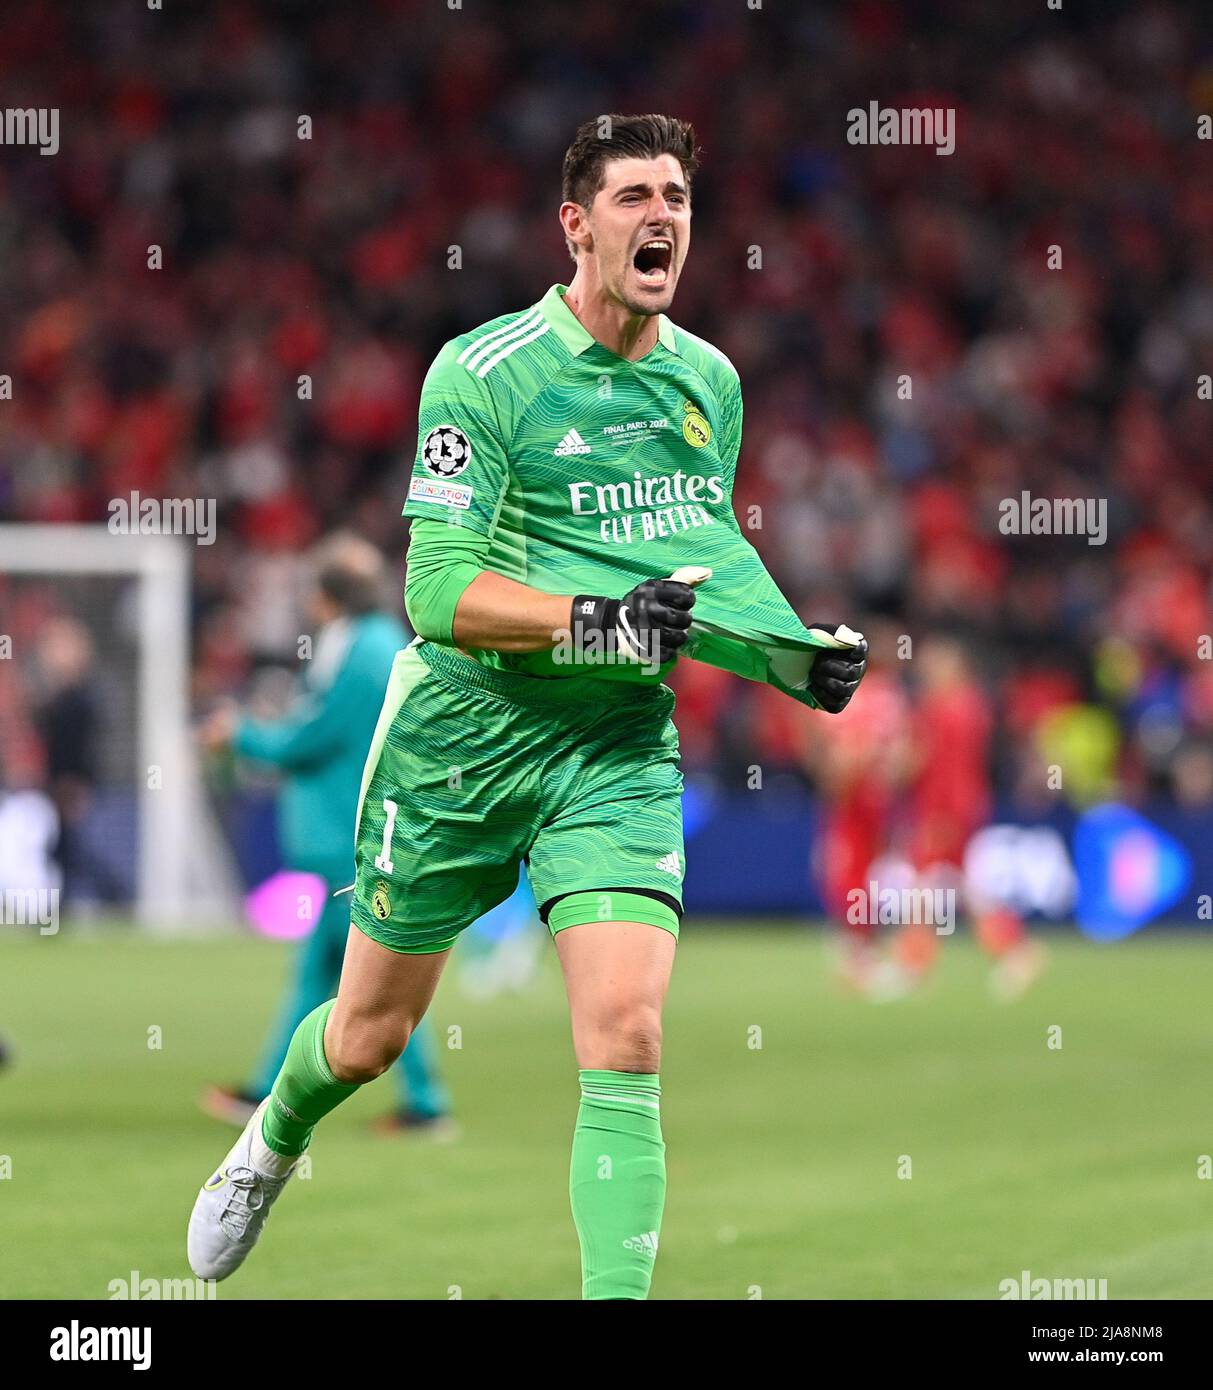 May 28, 2022, Saint-Denis, Ile De France, France: Stade De France Thibaut  Courtois of Real Madrid pictured celebrating after winning the Champions  title during a soccer game between Liverpool Football Club and